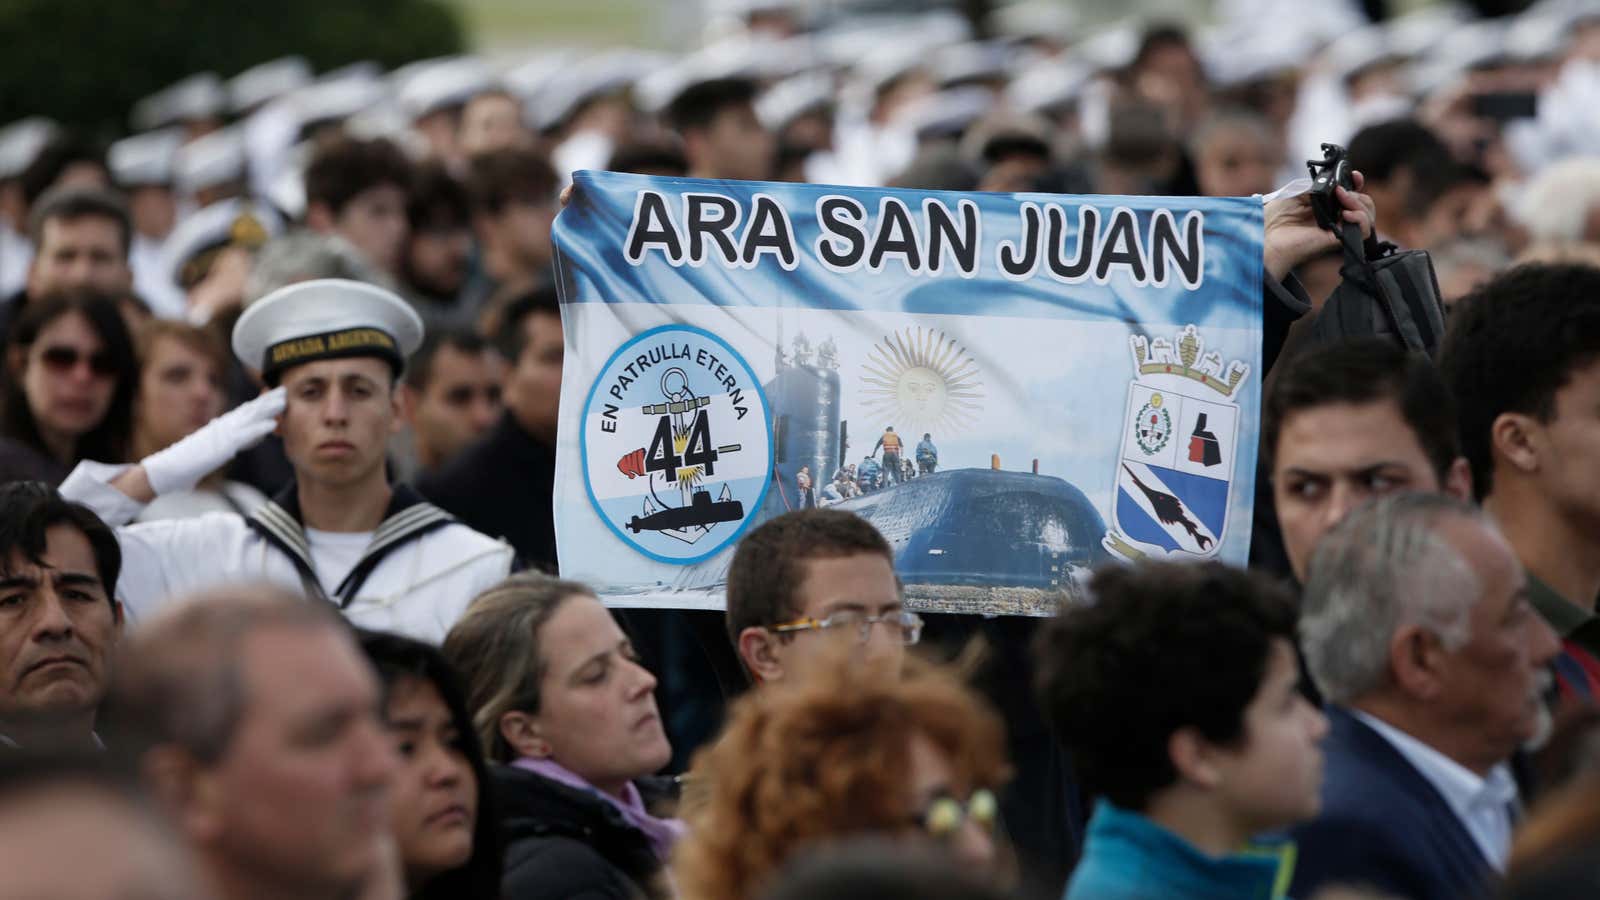 The ARA San Juan disappeared a year ago off the coast of Argentina.